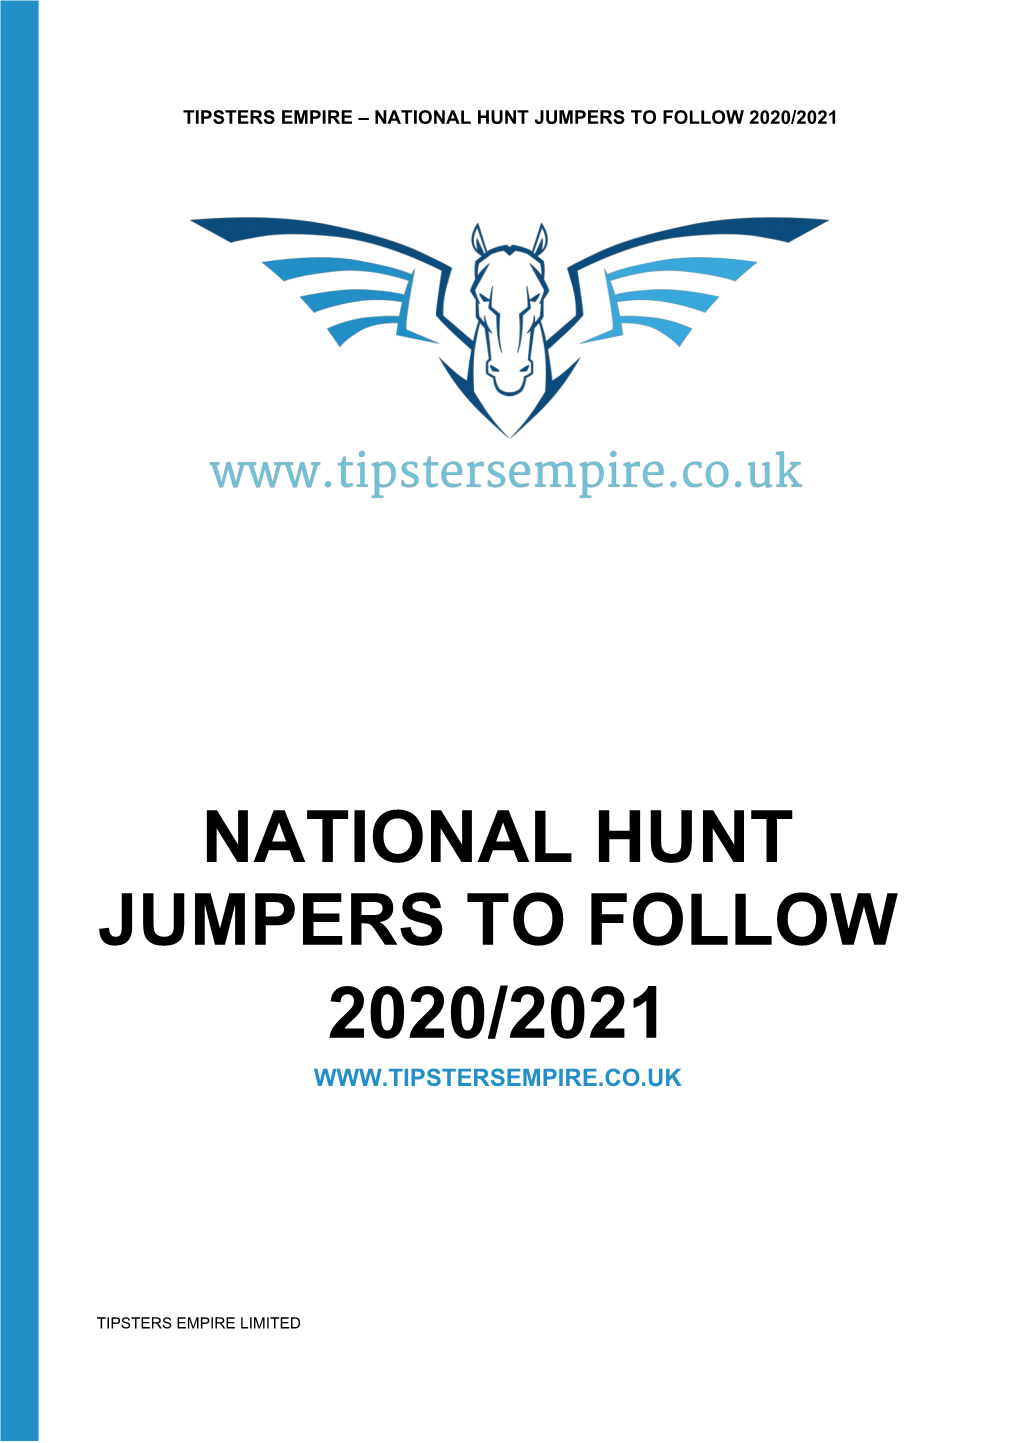 National Hunt Jumpers to Follow 2020/2021